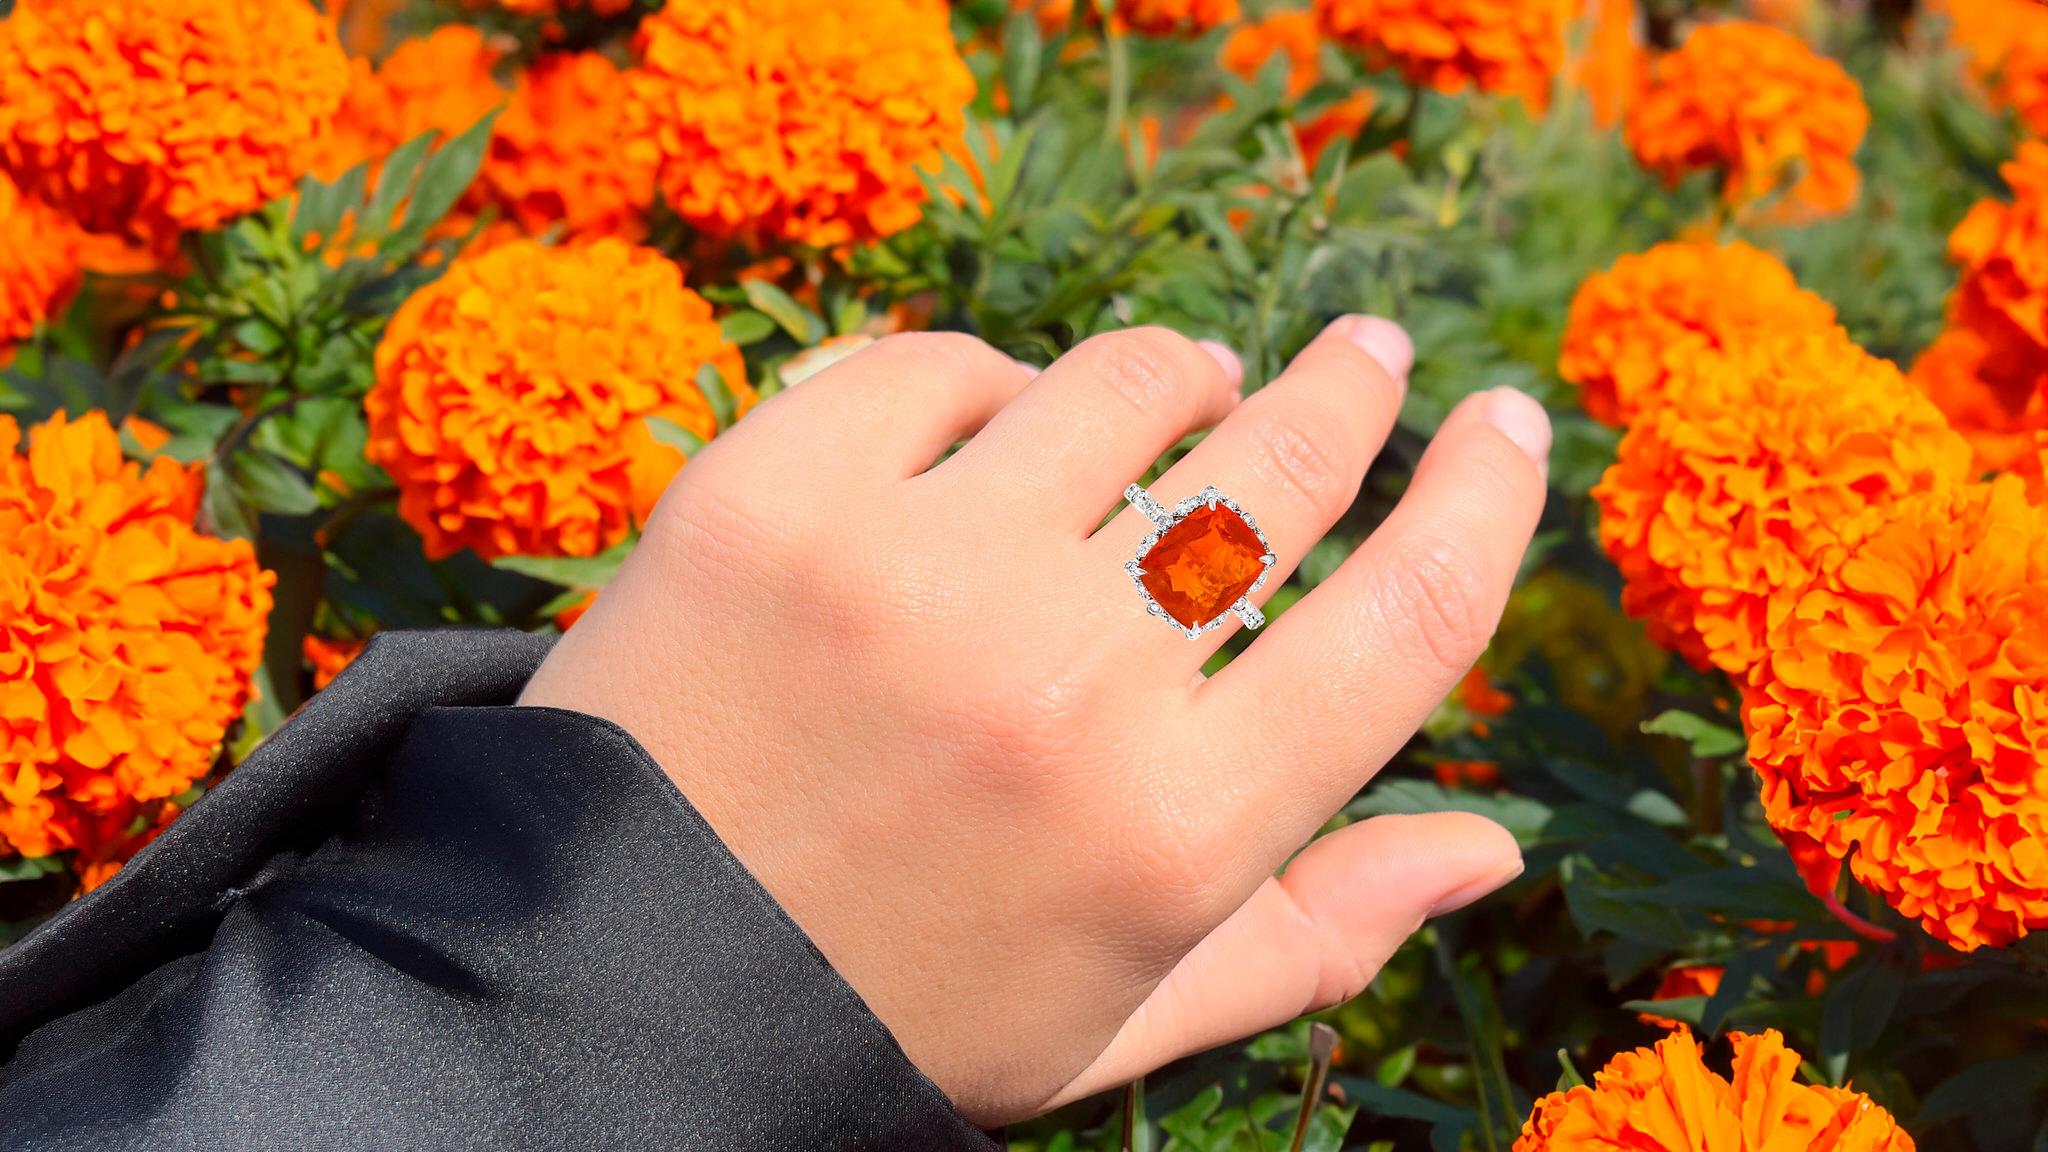 Cushion Cut Fire Opal Ring With Diamonds 3.37 Carats 14K White Gold For Sale